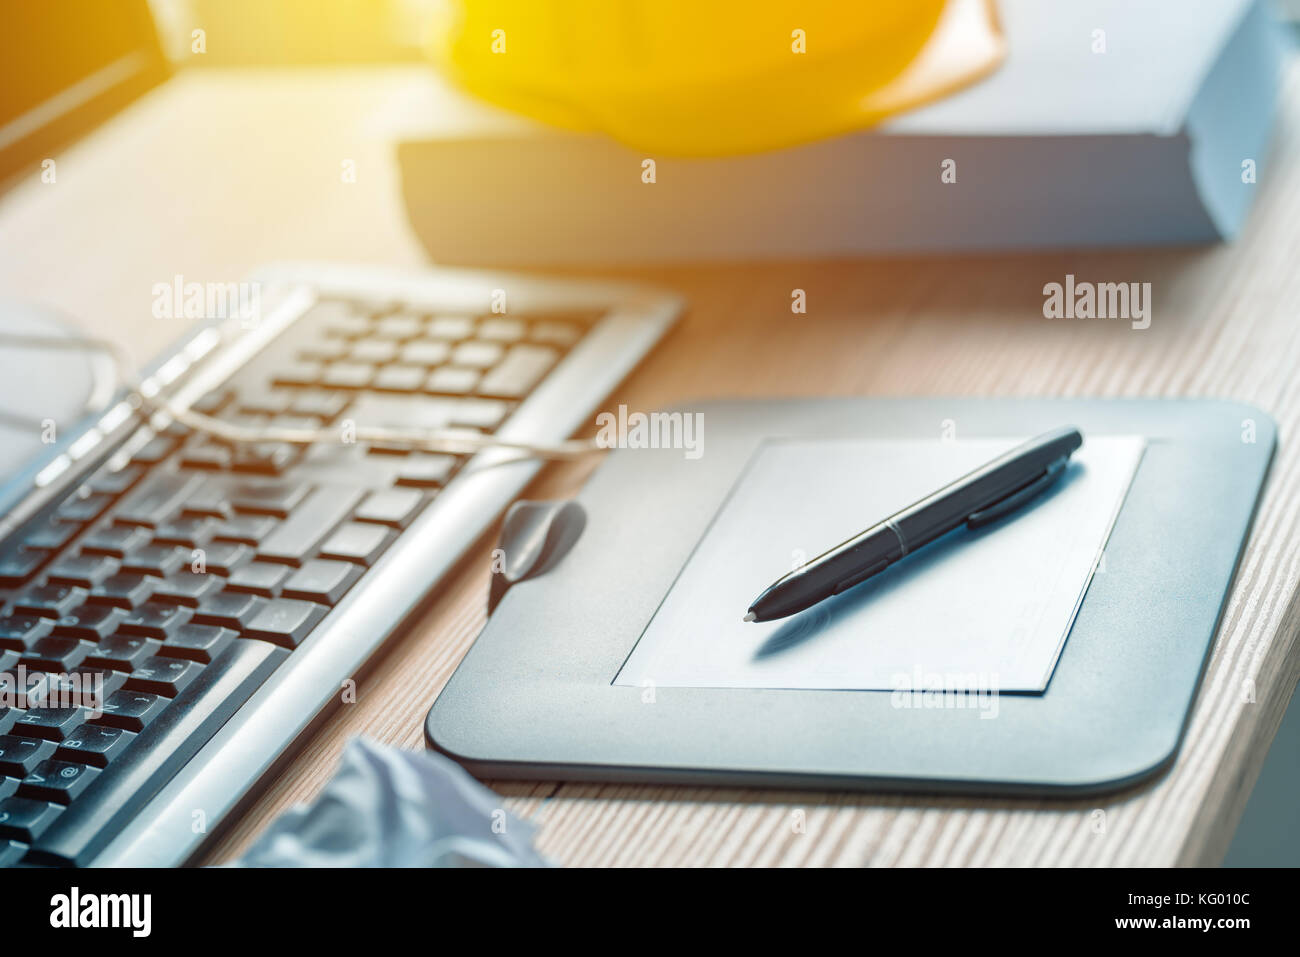 Graphic tablet and pencil on office desk in architecture and interior design project studio Stock Photo